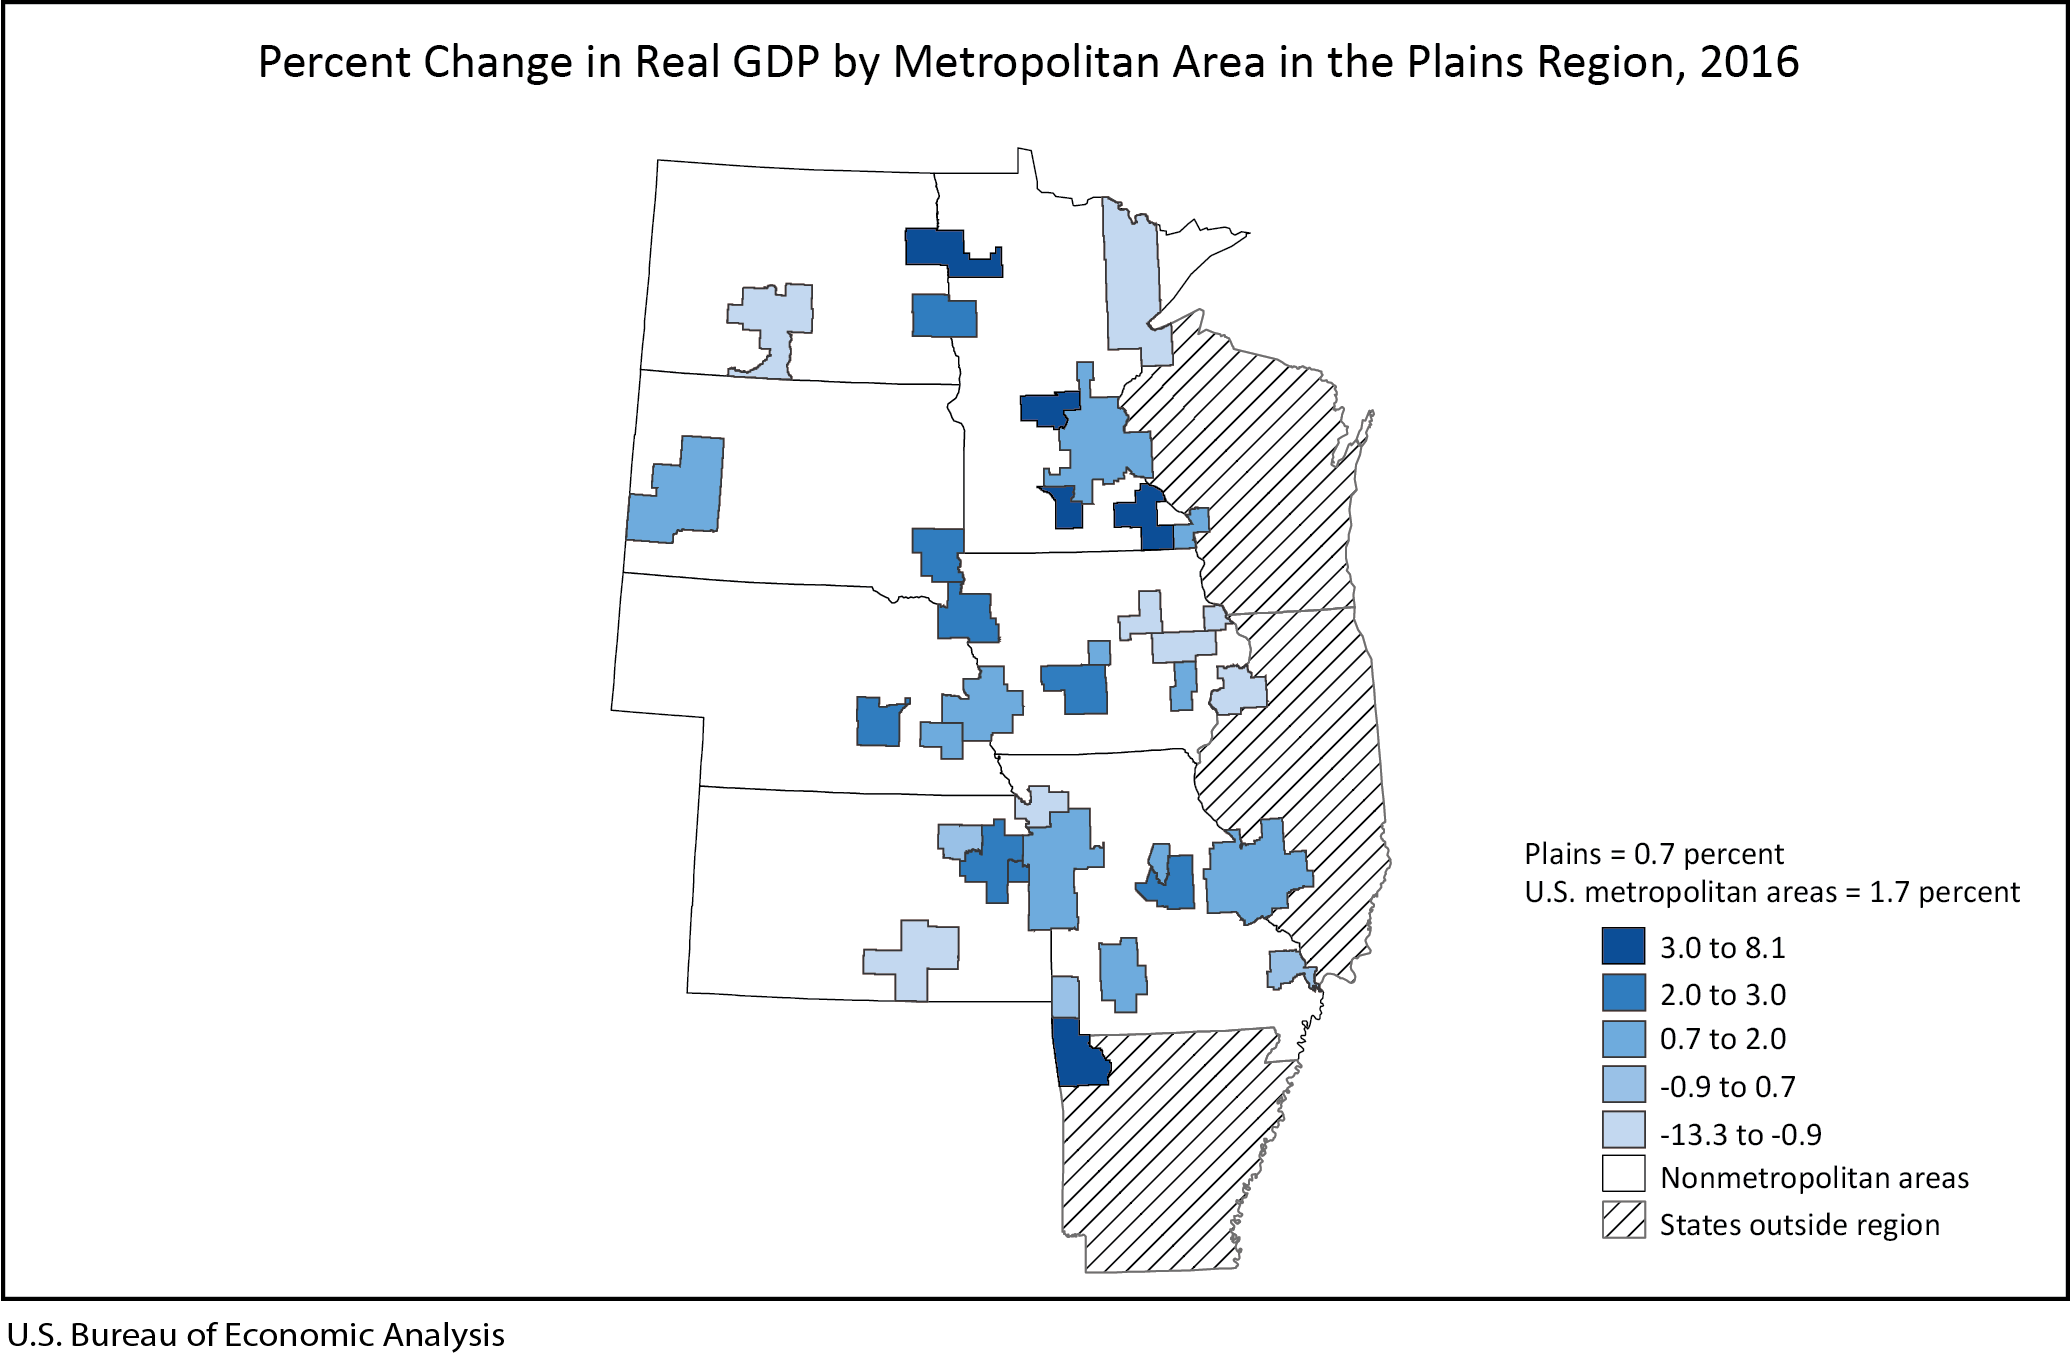 Graph of Percent Change in Real GDP by Metropolitan Area in the Plains Region, 2016